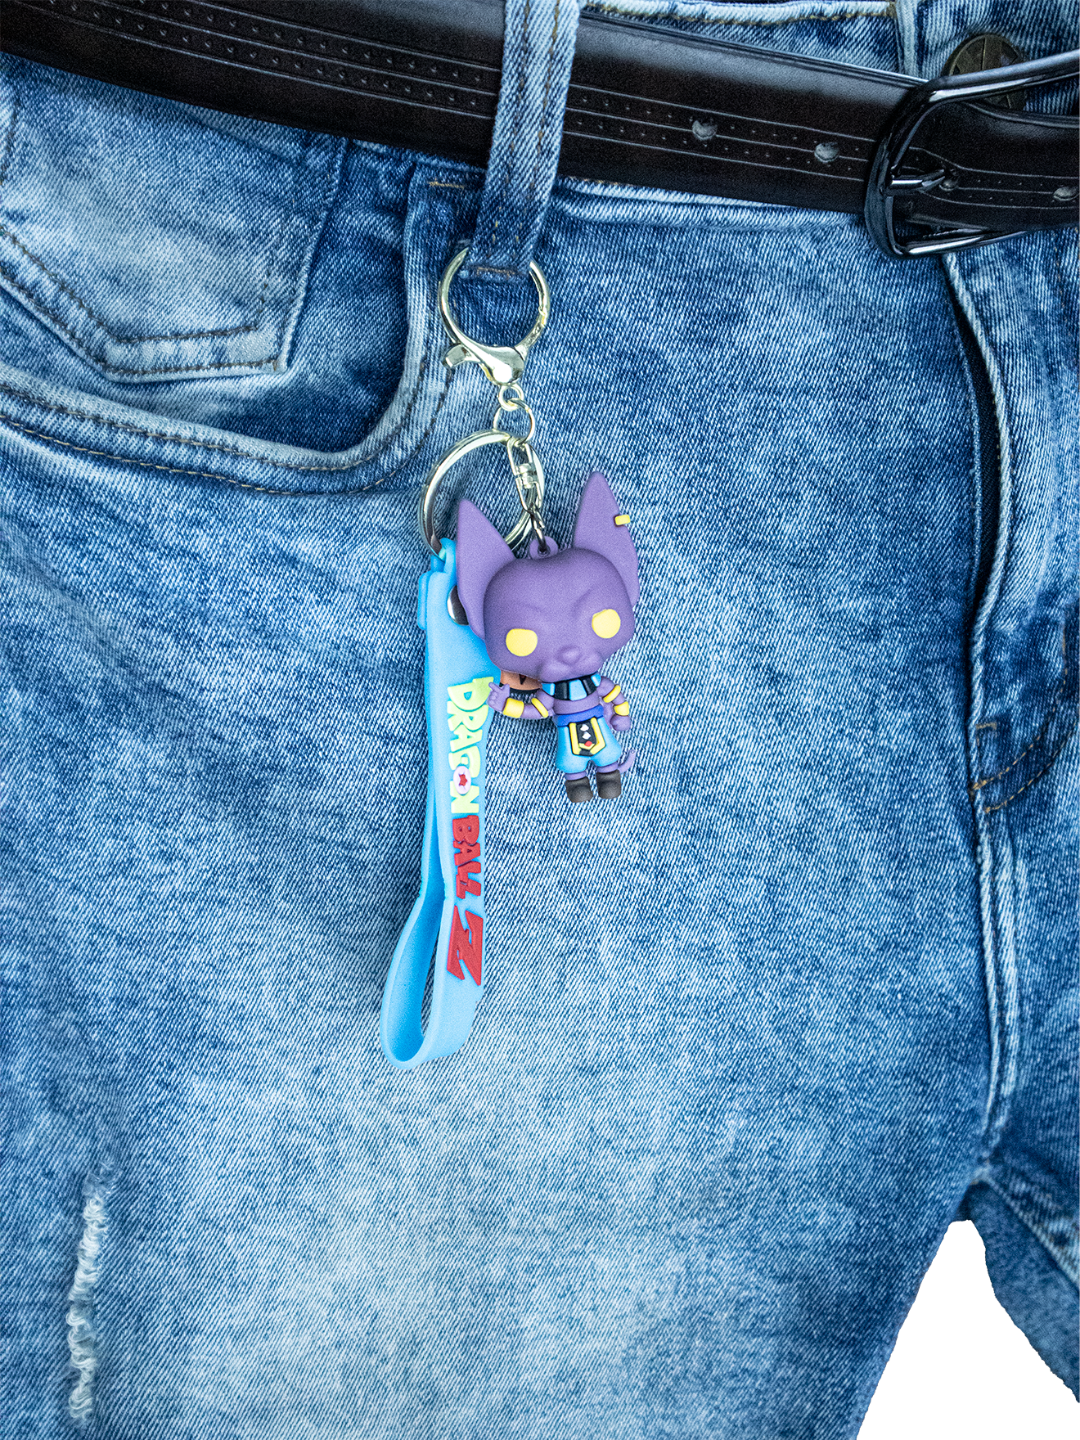 Lord Beerus Dragon Ball Anime Keychain on a Jeans